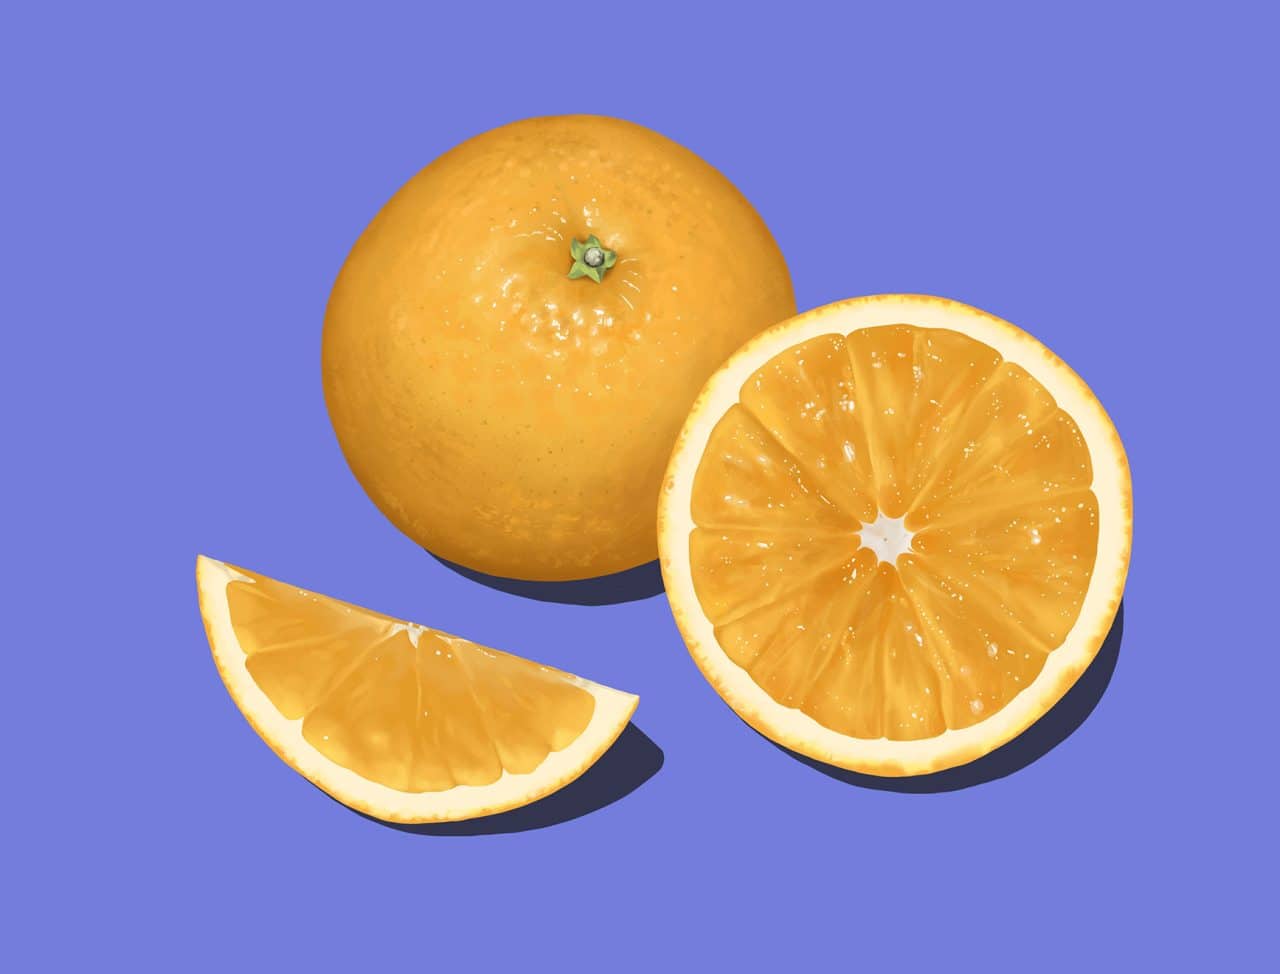 Now you're an expert on how to make a realistic orange drawing!